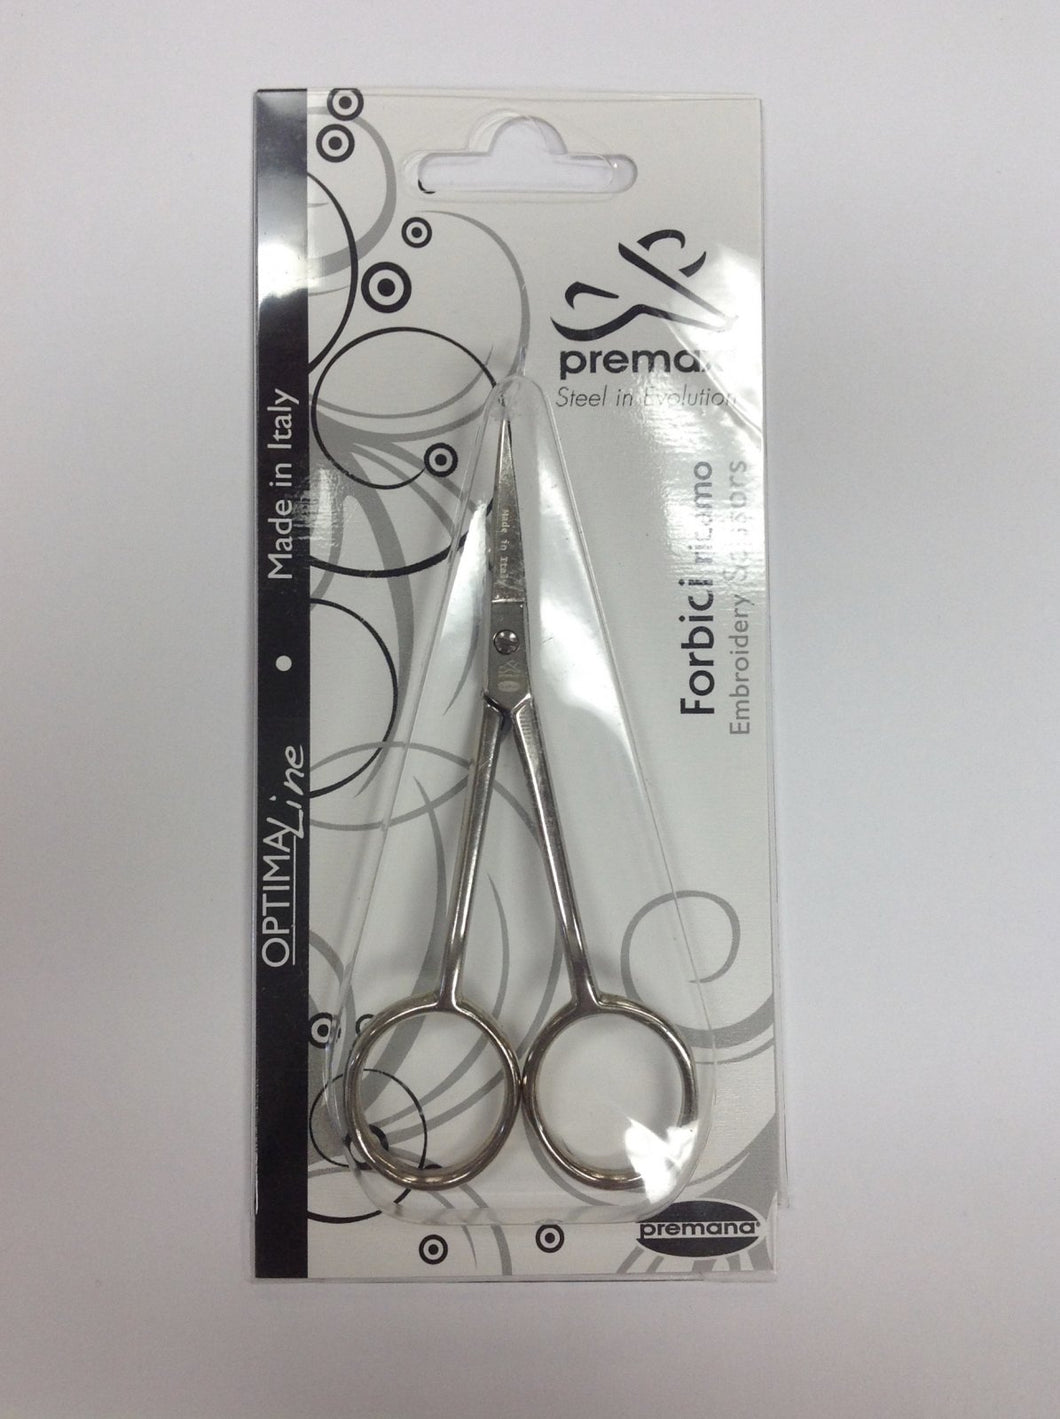 sewing machine scissors - double curved